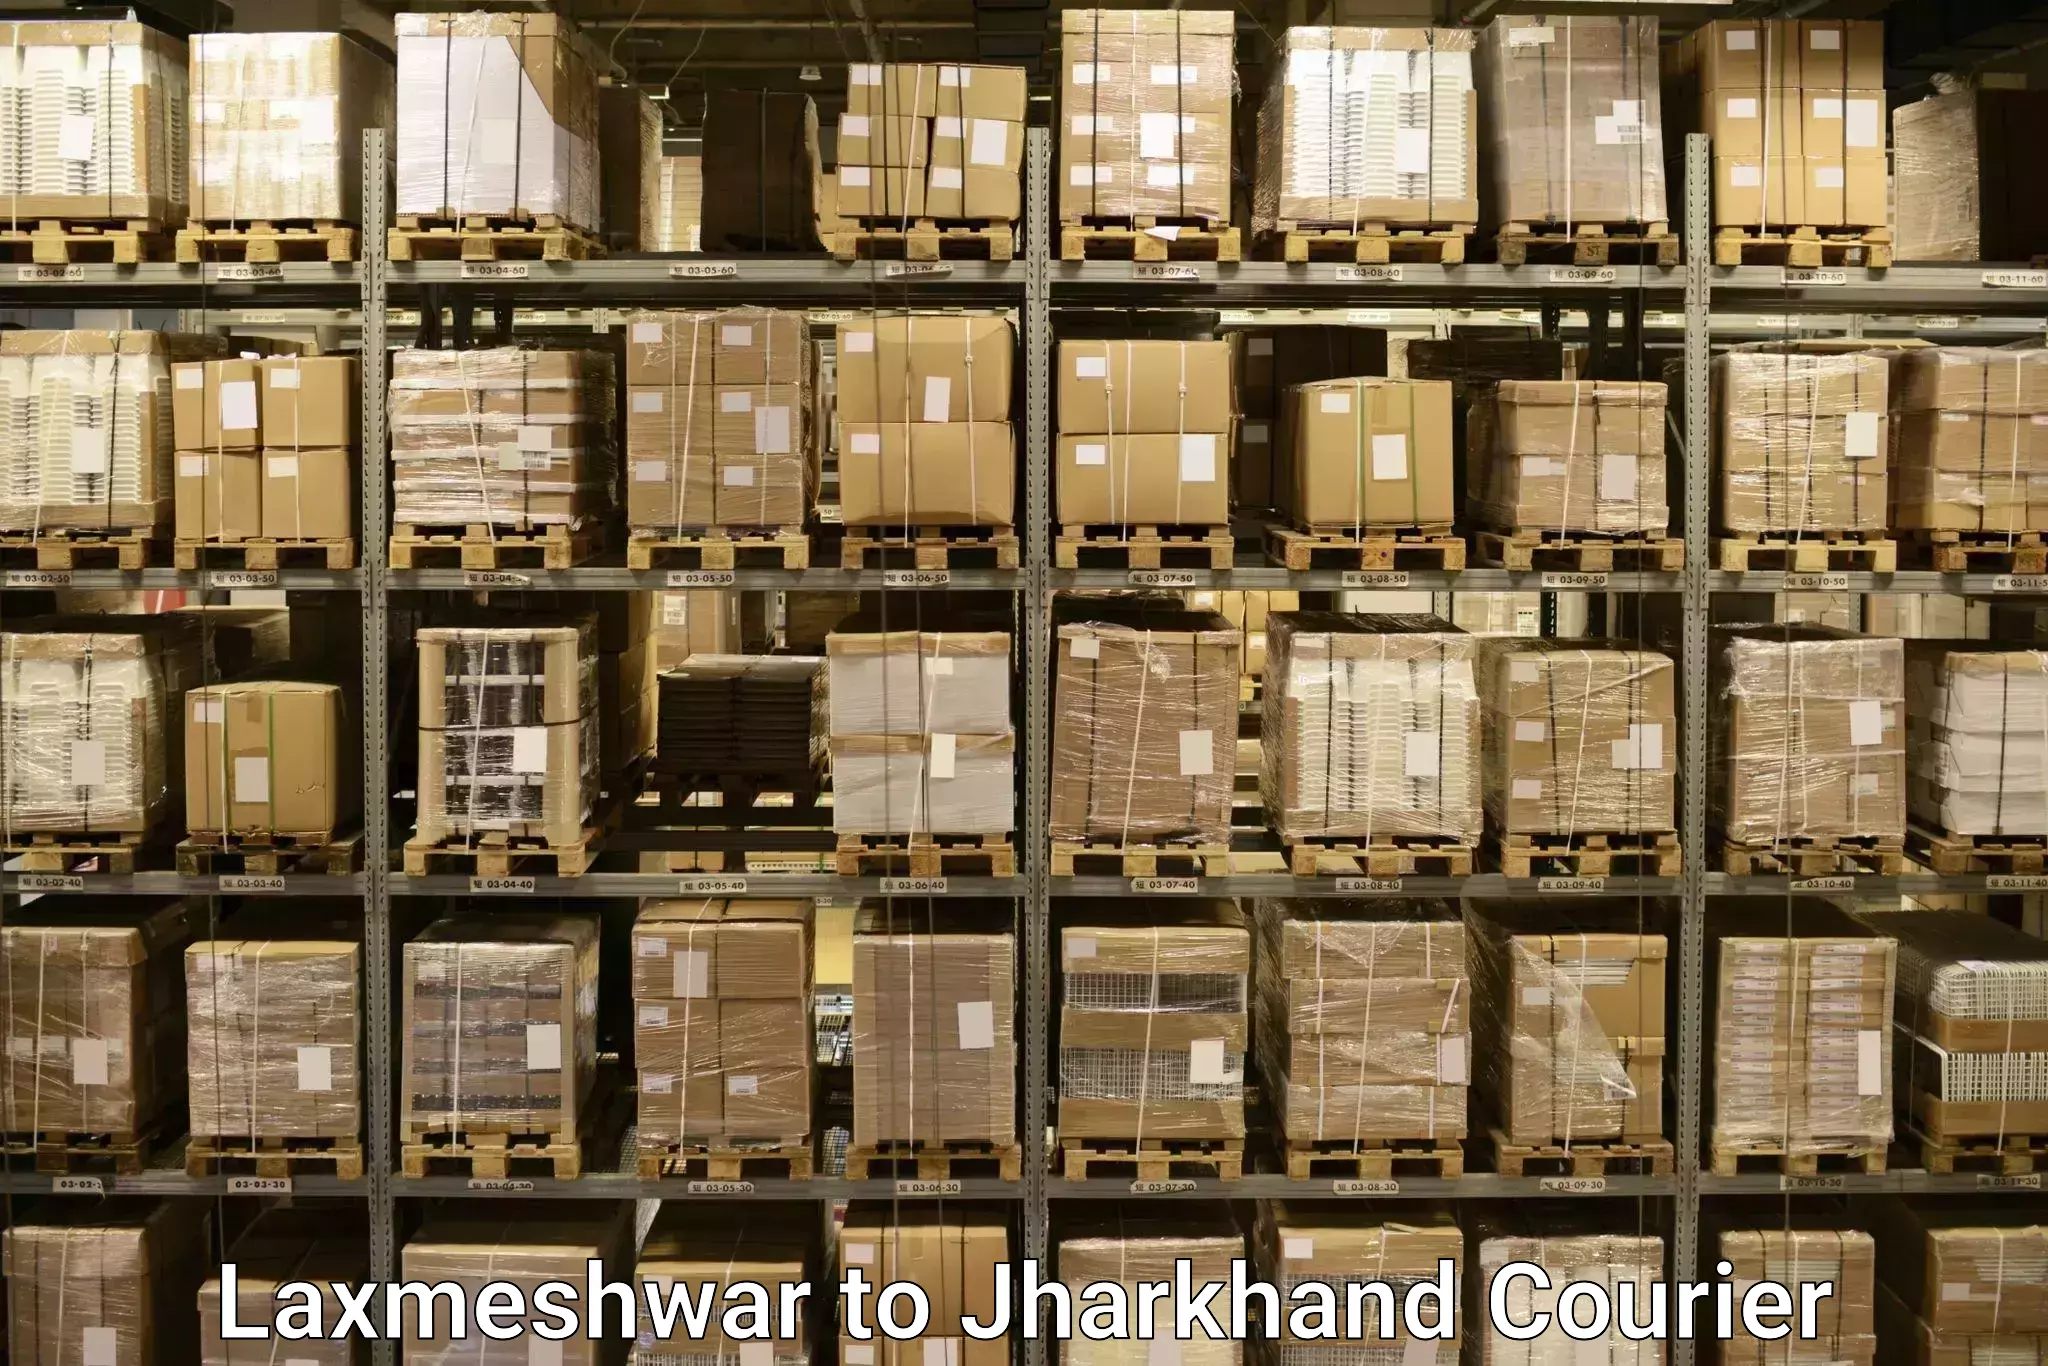 Luggage transport service Laxmeshwar to Jharkhand